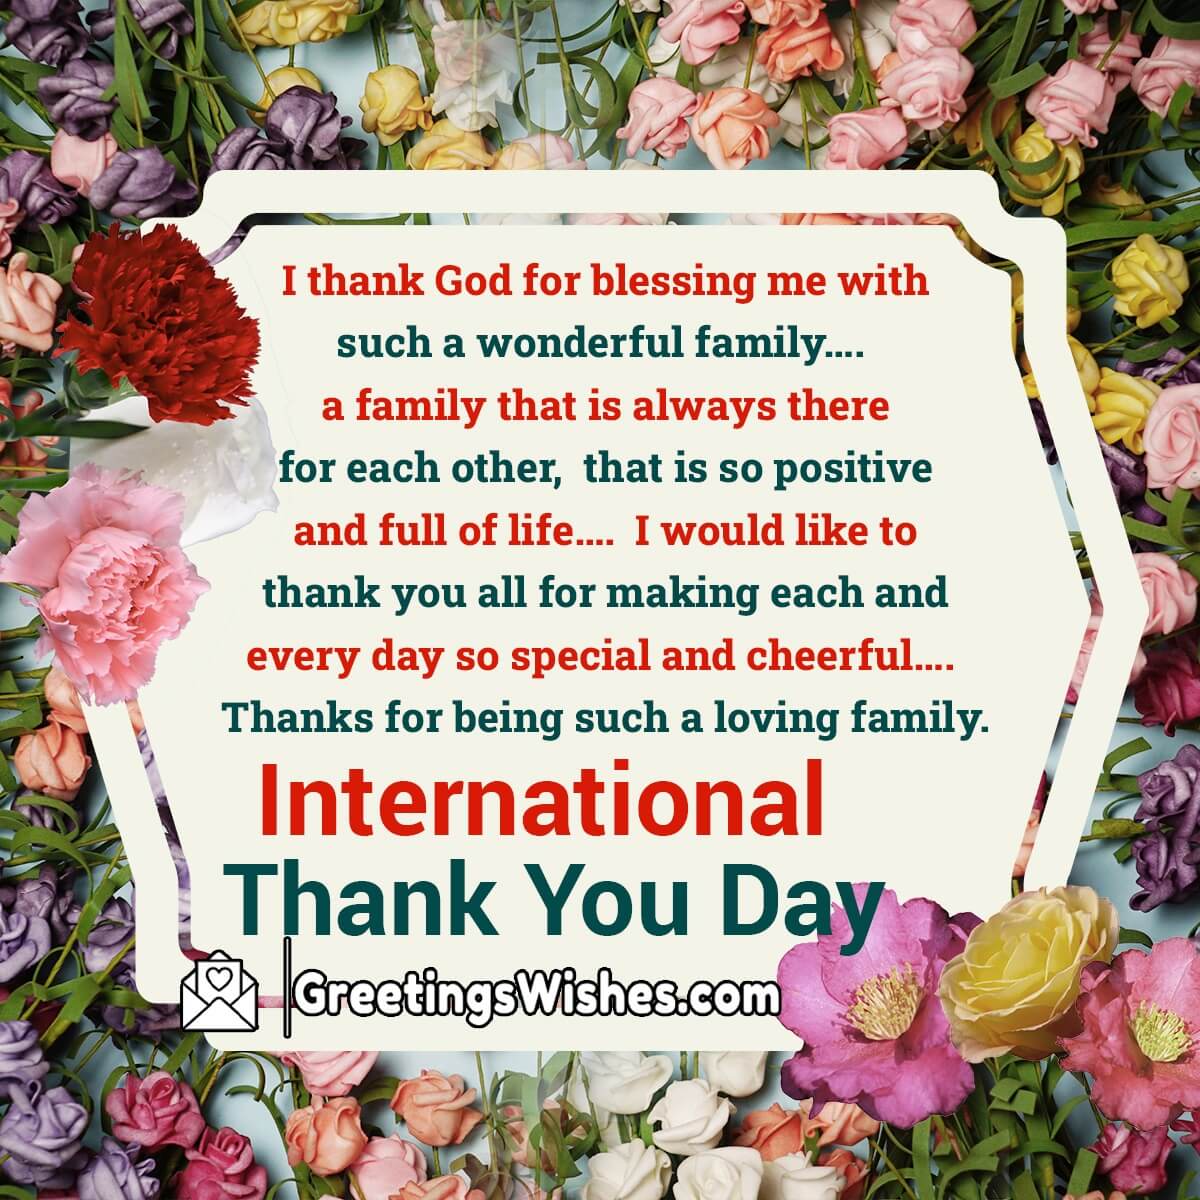 International Thank You Day Message For Family